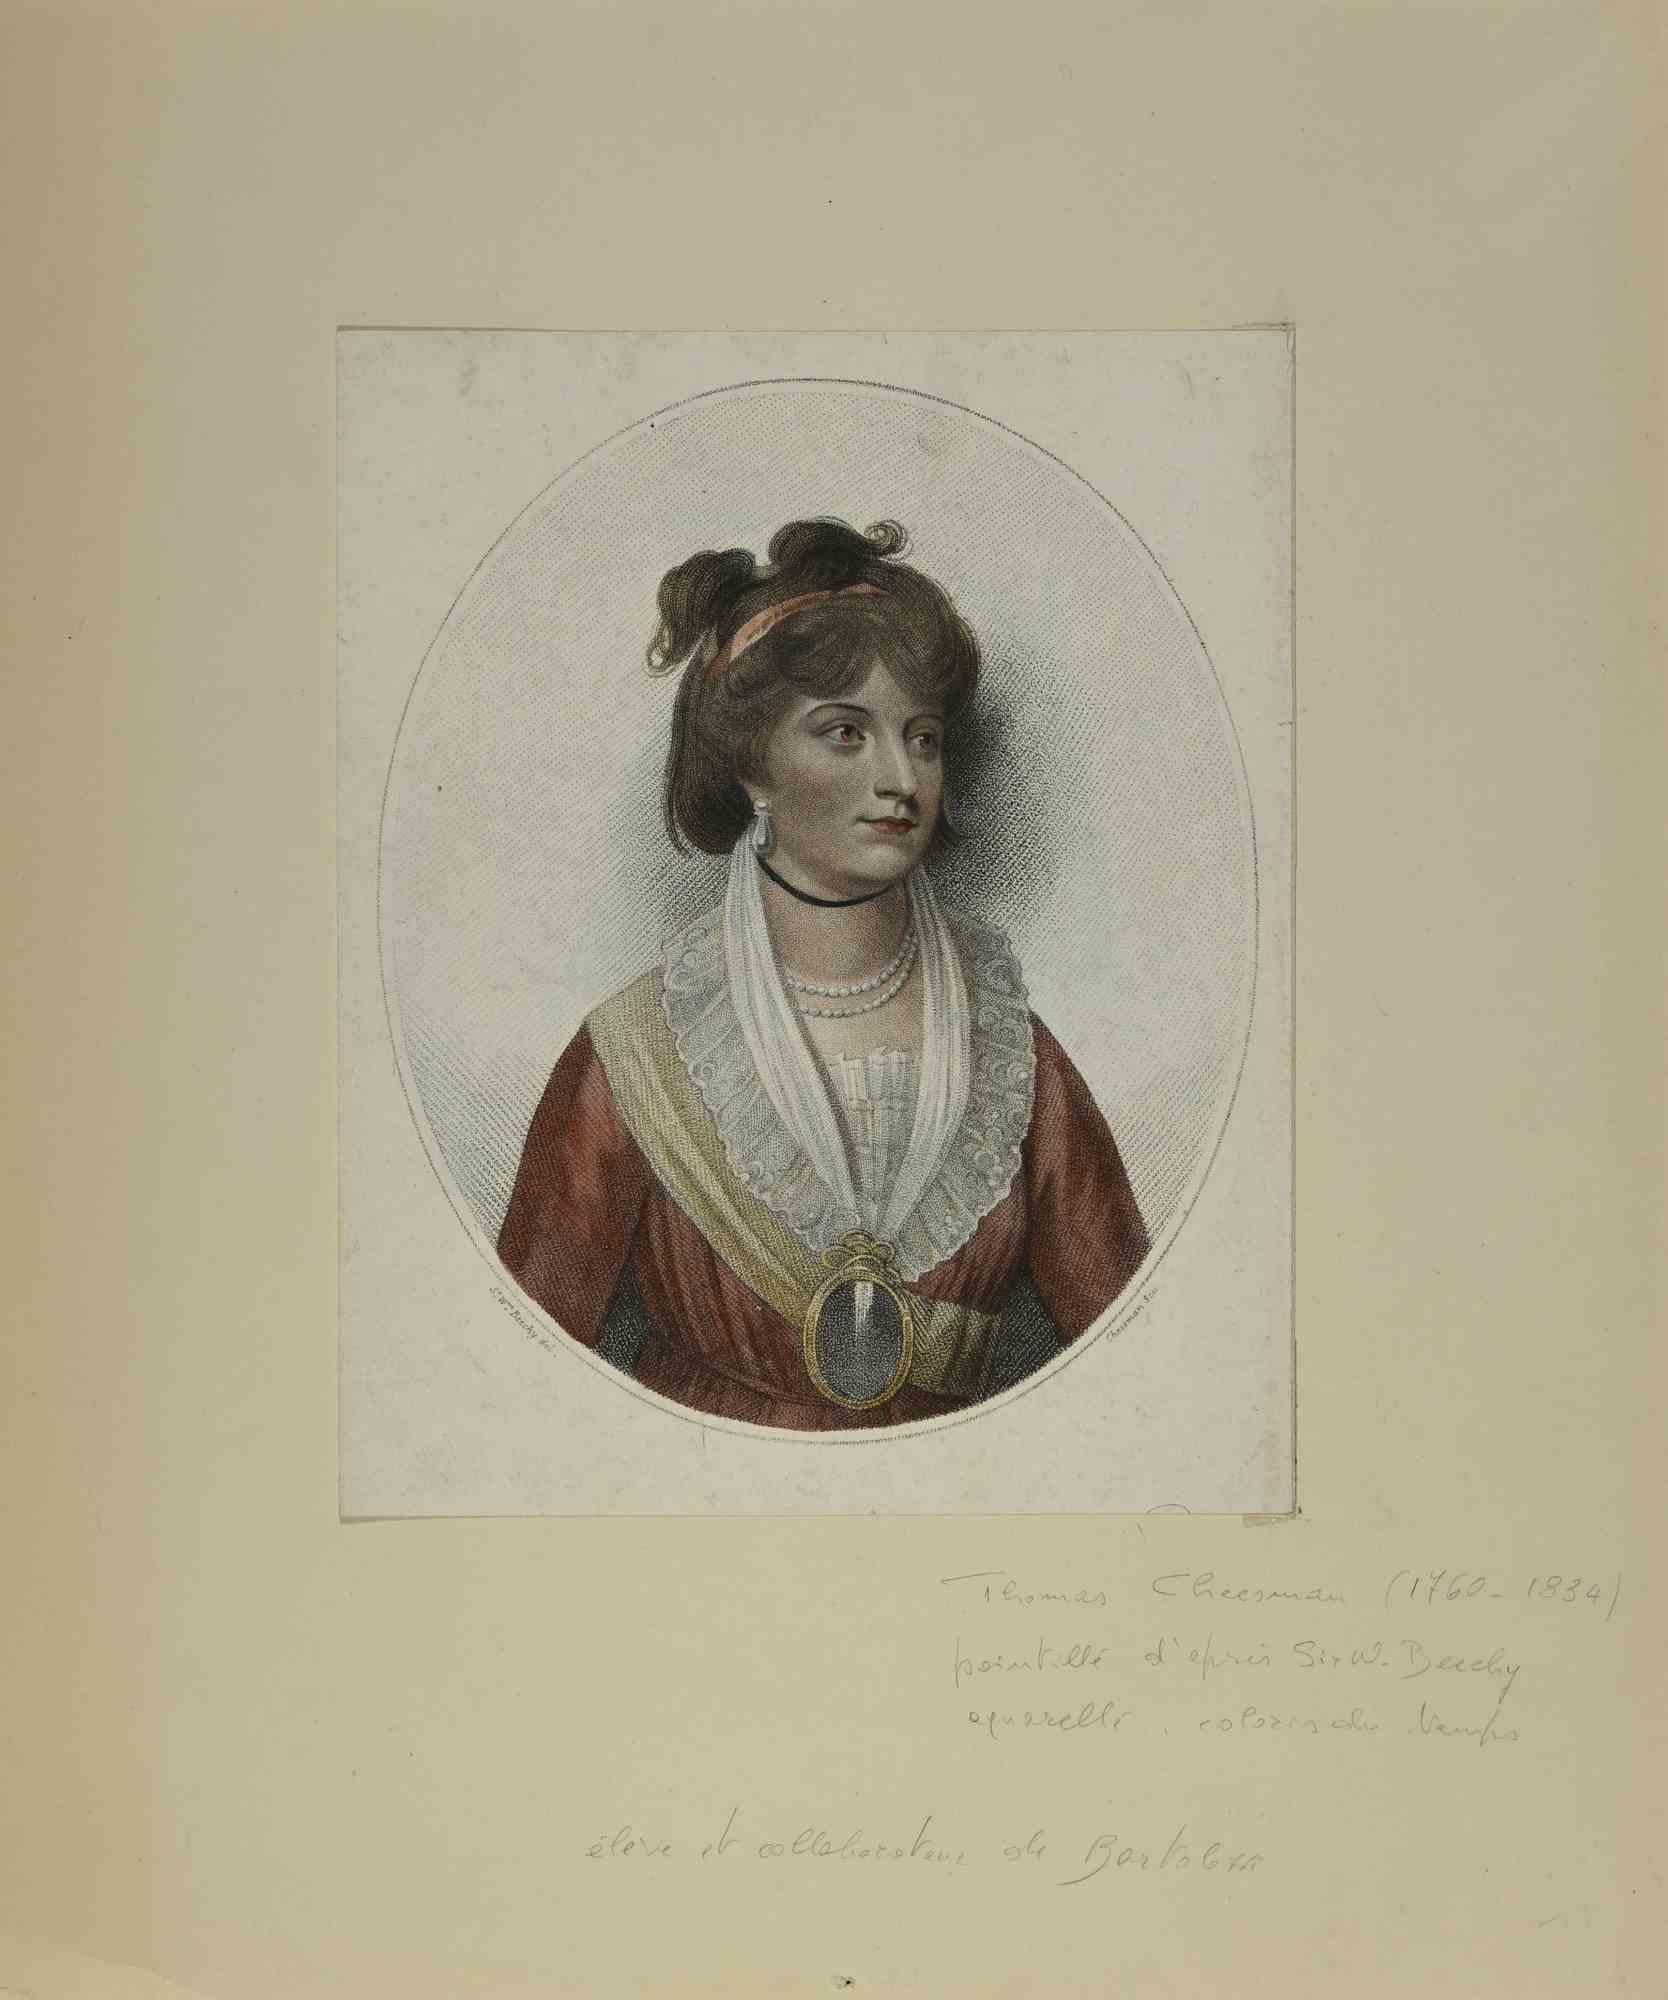 Portrait of a Lady is a beautiful etching on paper, realized by the English artist  Thomas Cheesman (1760 - 1834). 

Signed on plate on the right corner, the watercolor etching is d'après Sir W. Beechy .

The work is glued on cardboard. Total